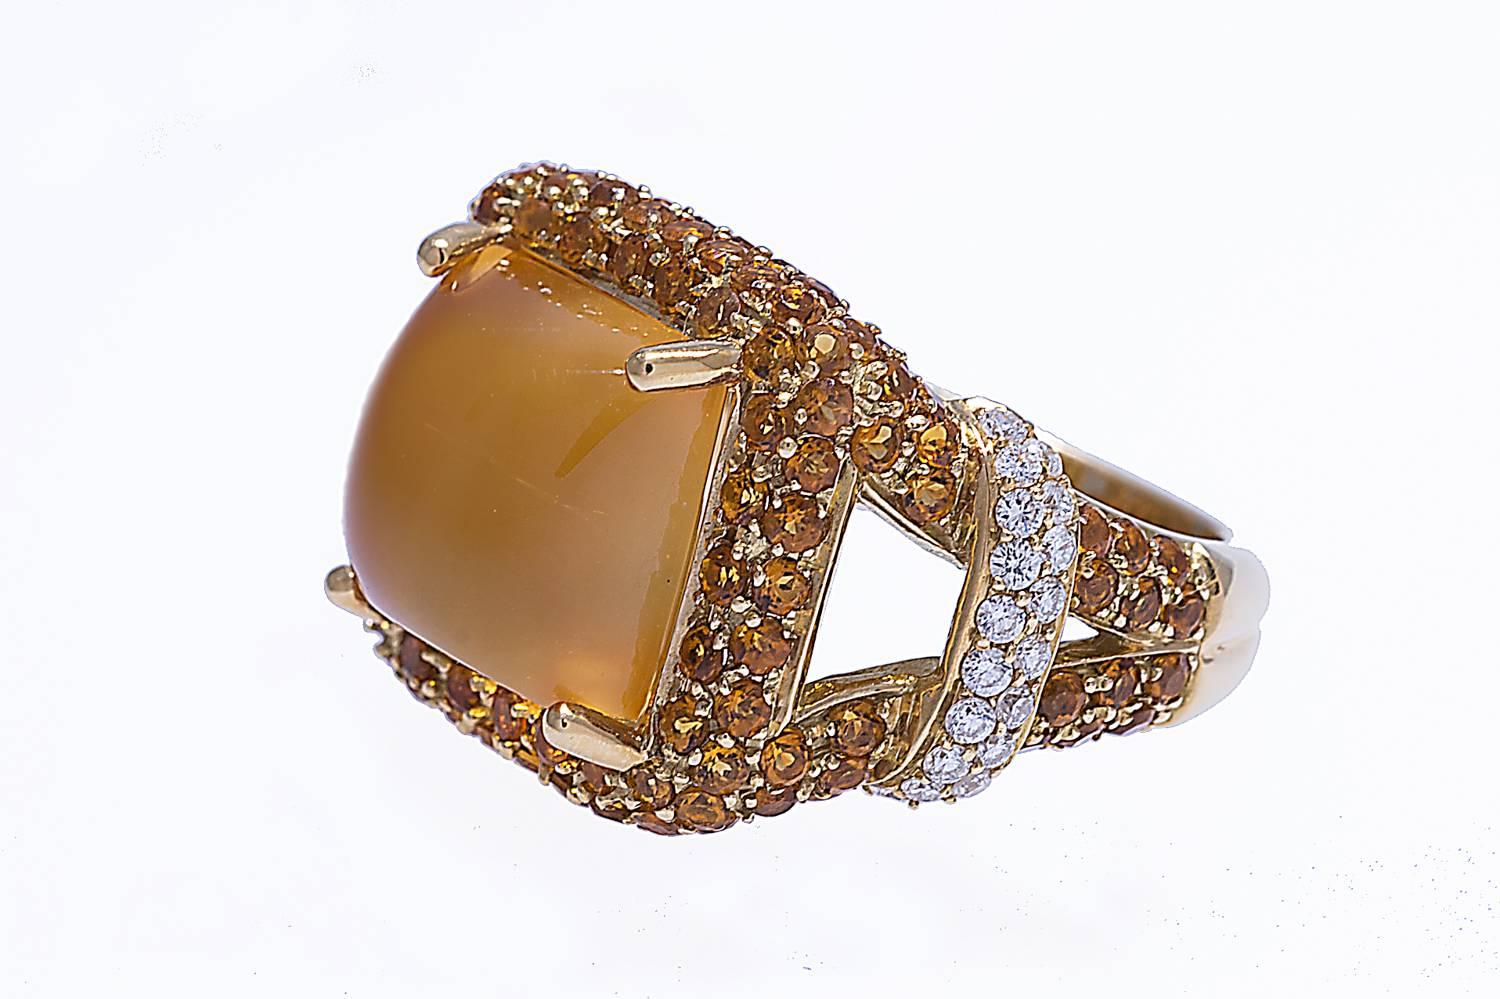 18K ring with a citrine cabochon weighing 9.19 carats in the center. The mounting contains yellow sapphires and diamonds. Size 7. Can be sized.